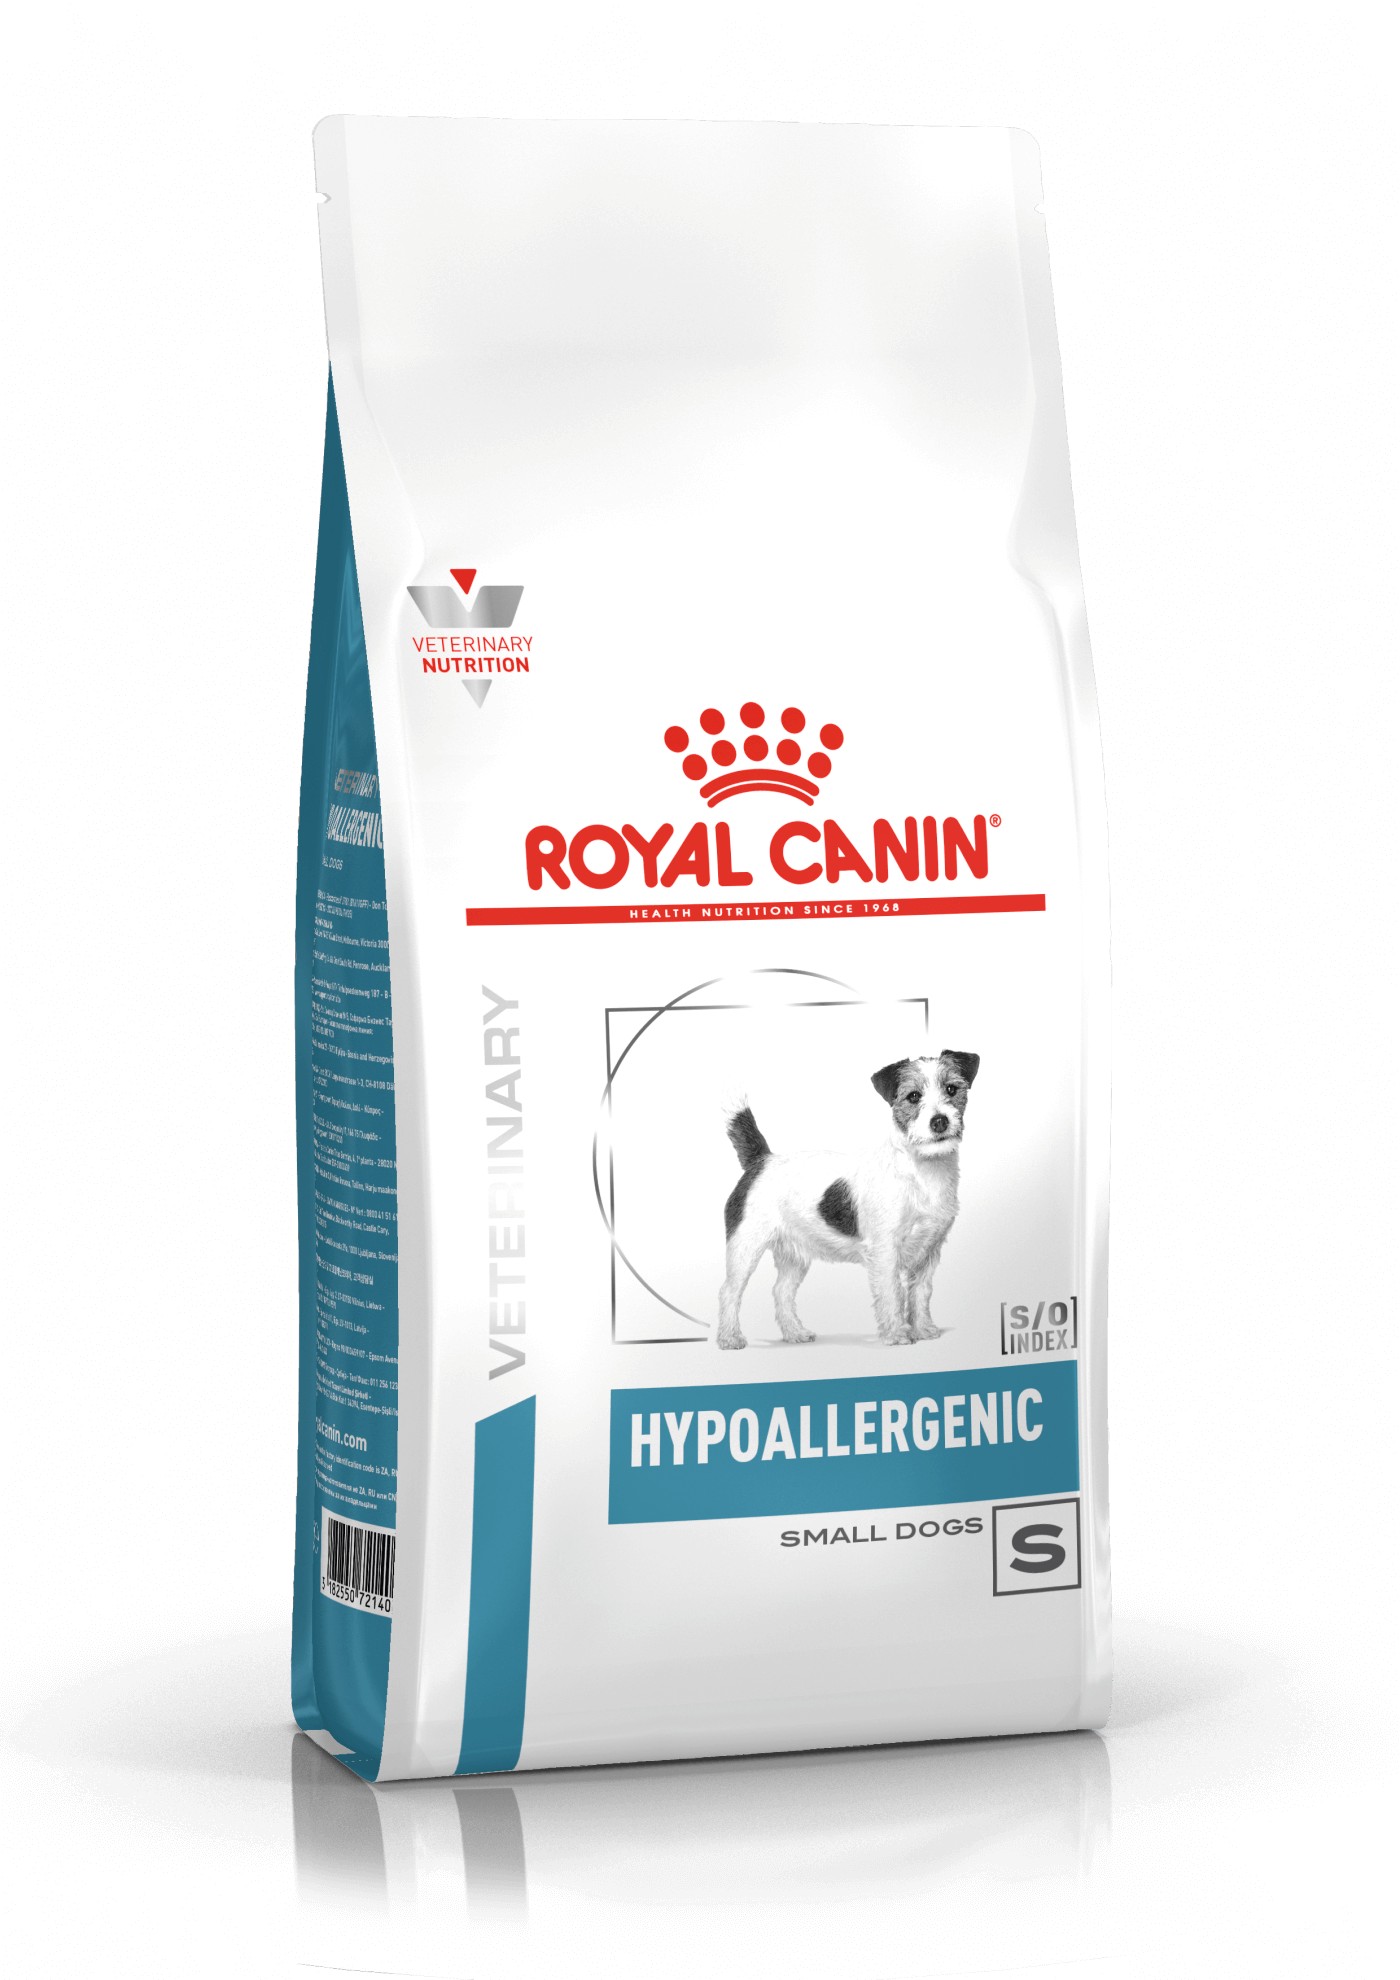 Royal Canin Veterinary Hypoallergenic Small Dogs hundfoder